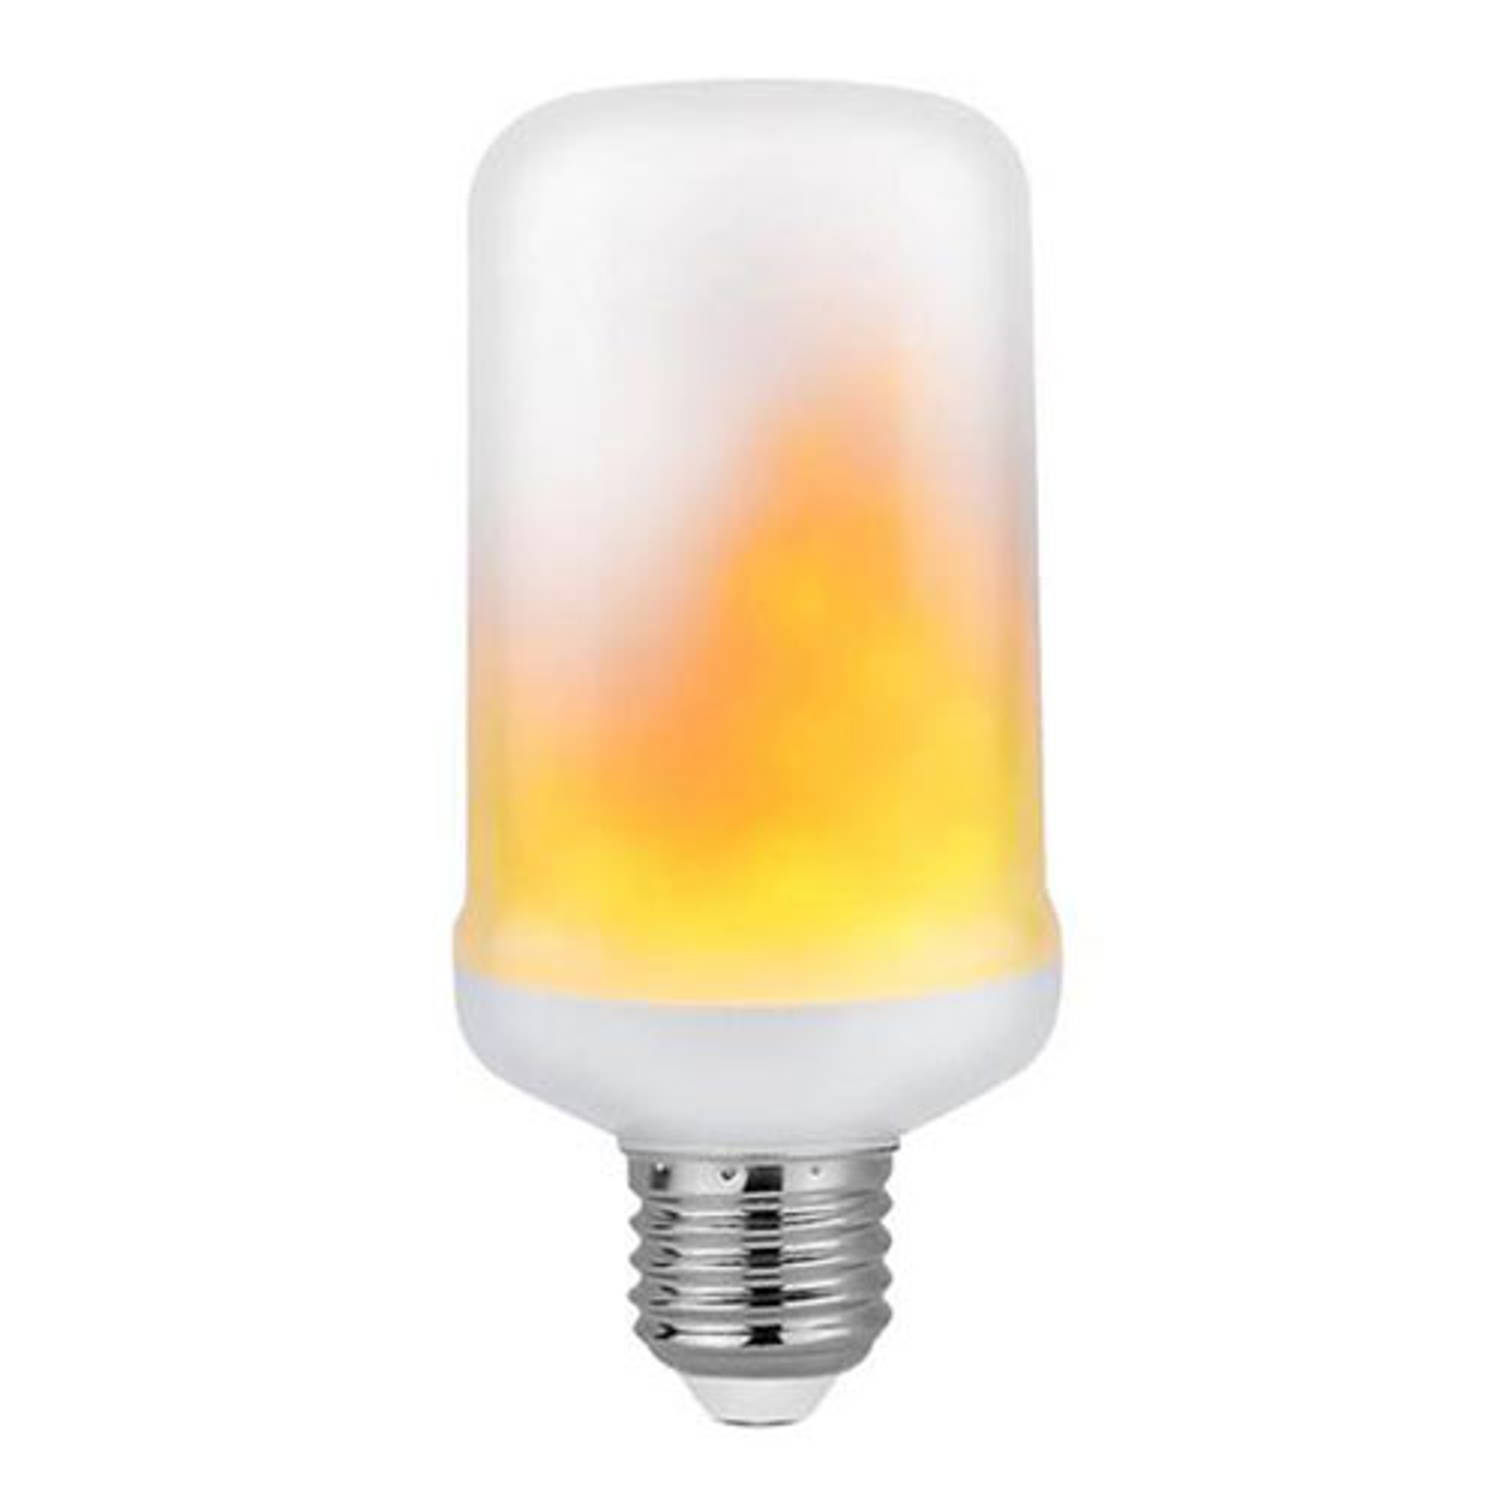 Licht Dakloos effectief LED Flame Lamp - Vuurlamp - E27 Fitting - 5W - Warm Wit 1500K | Blokker